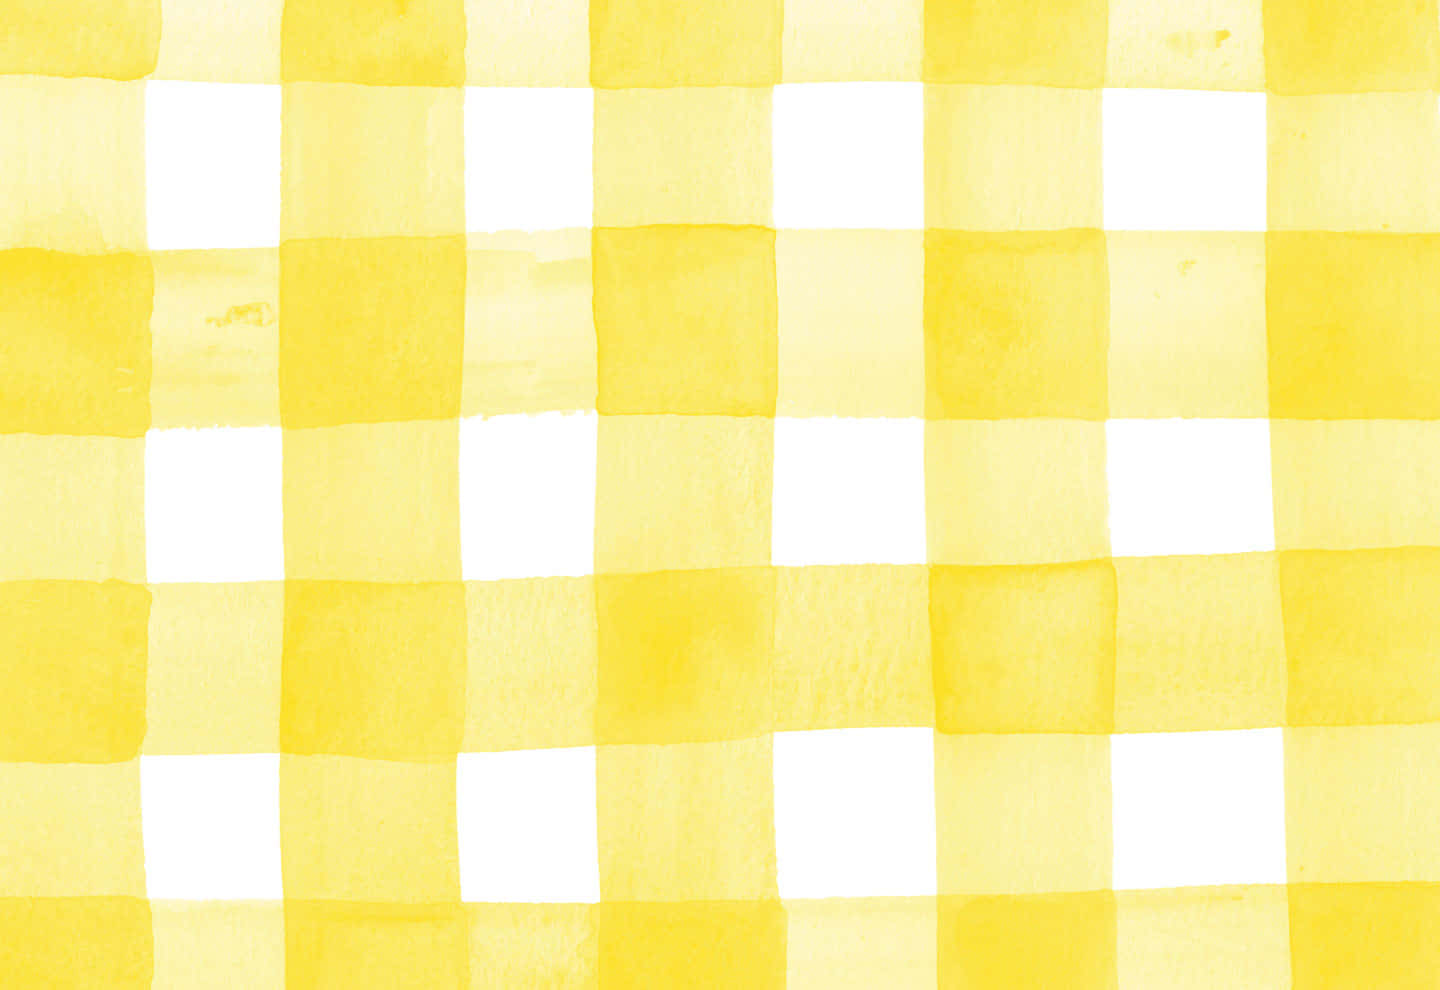 100+] Aesthetic Yellow Plaid Wallpapers 